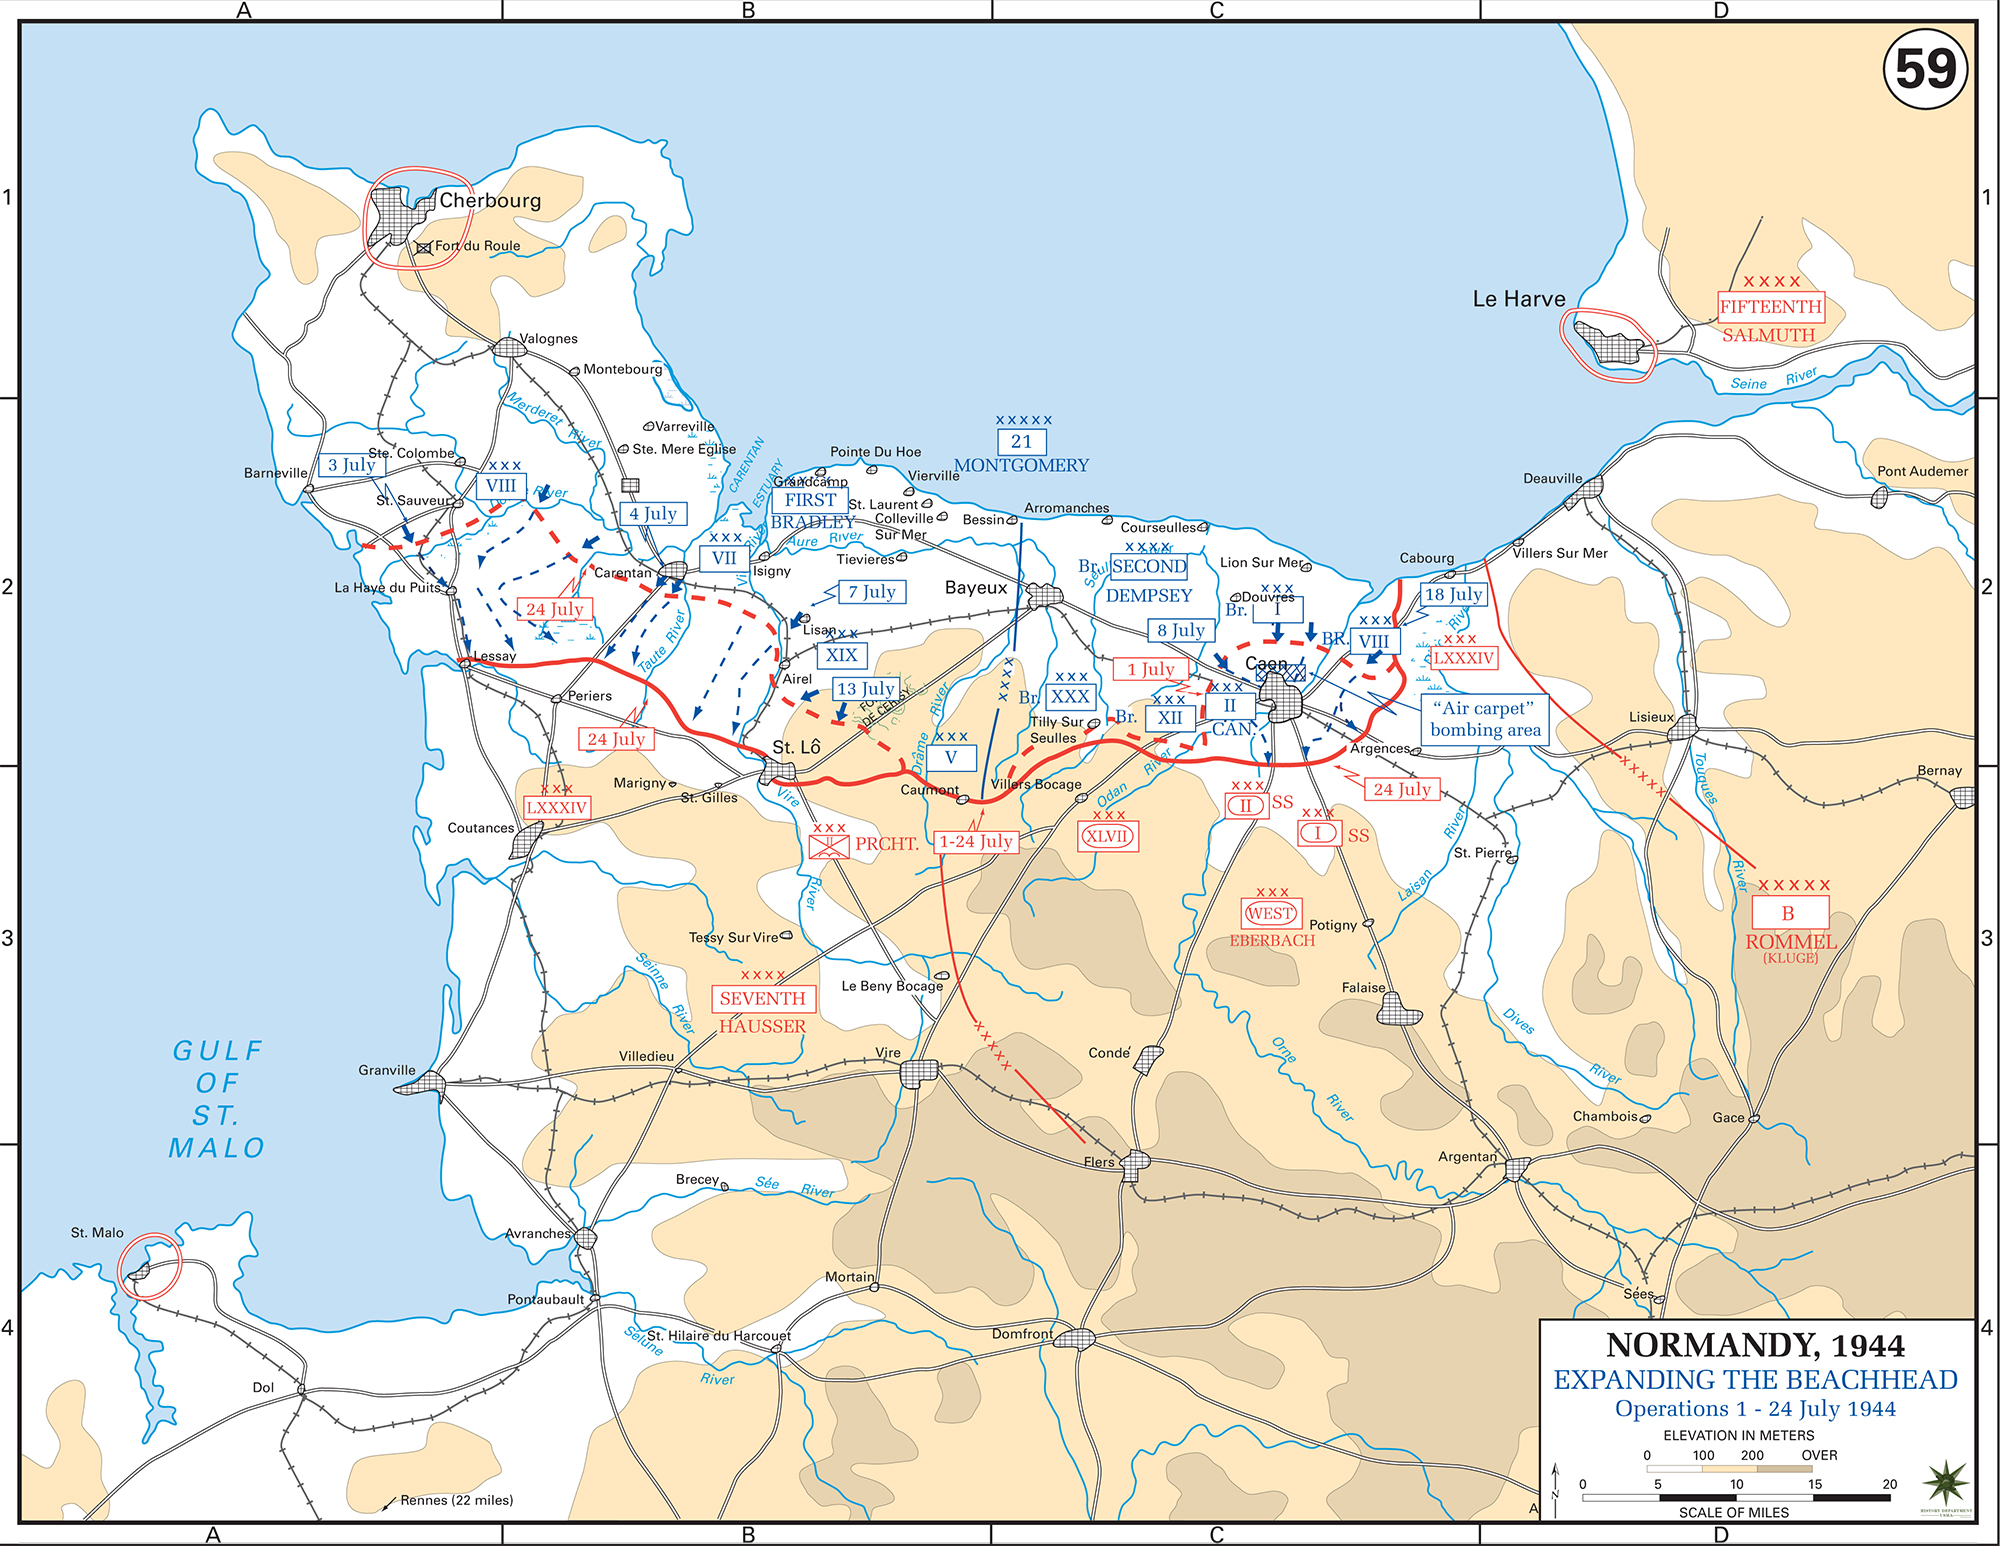 Map of WWII: Normandy Invasion. Operations July 1-24, 1944. Expanding the Beachhead.